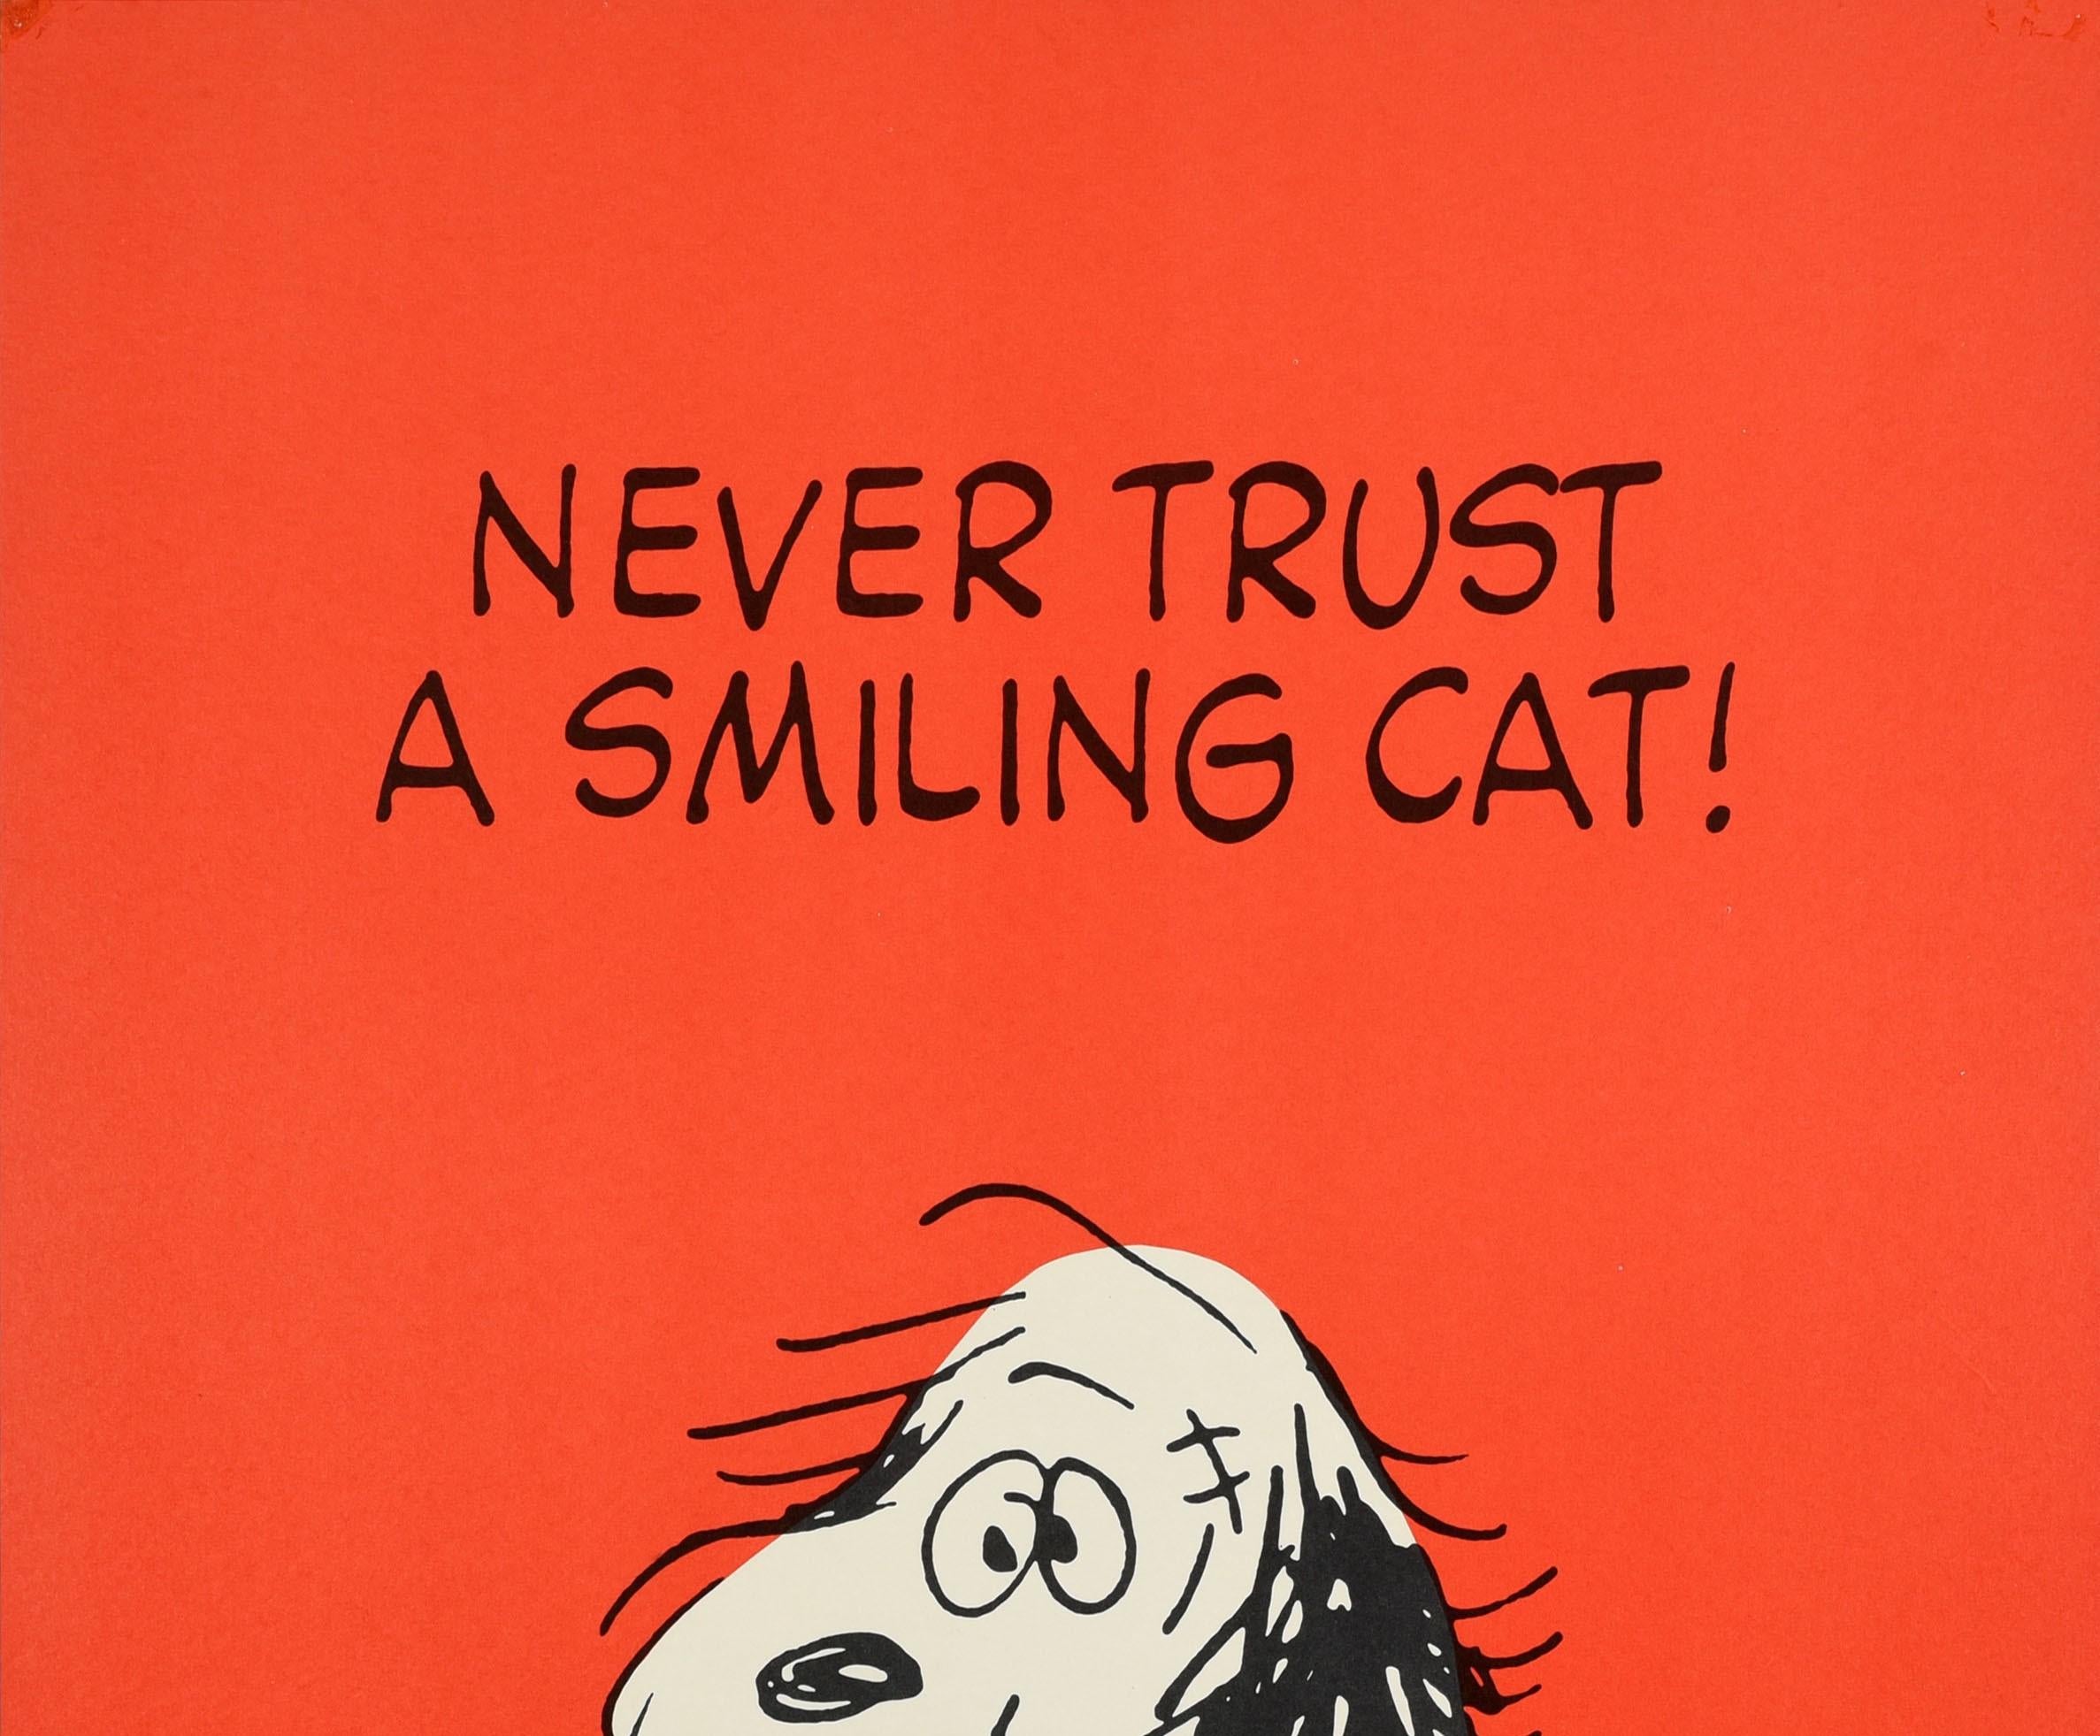 Original Vintage Poster Never Trust A Smiling Cat Snoopy Dog Quote Cartoon Art - Print by Charles M. Schulz